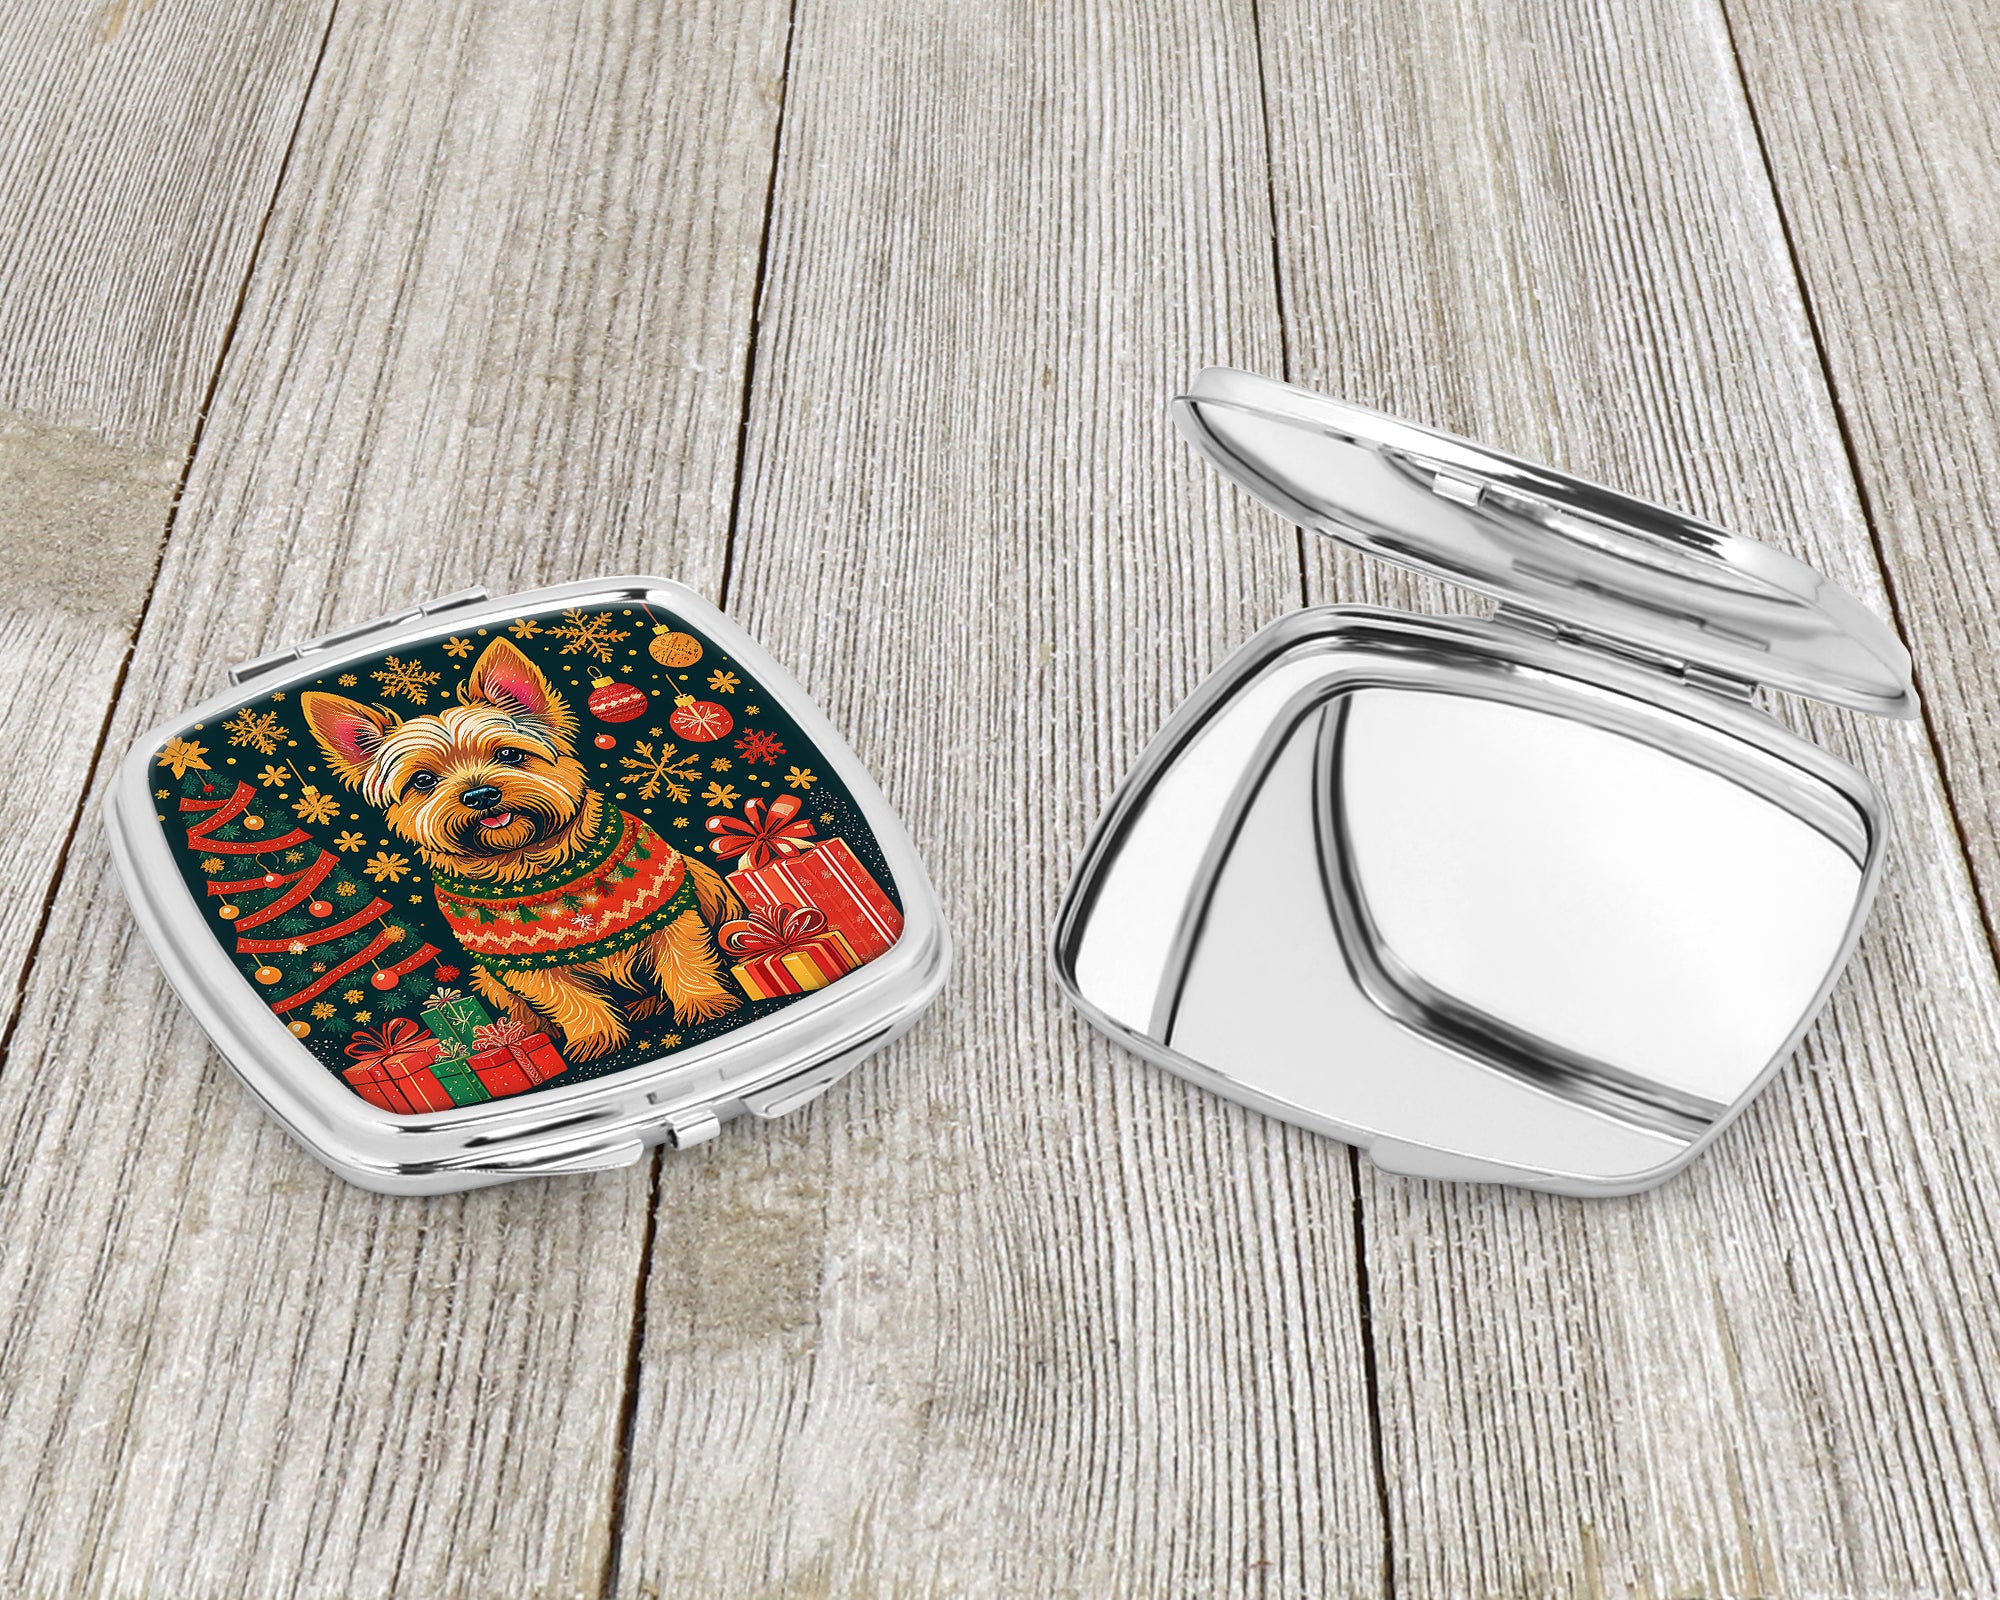 Norwich Terrier Christmas Compact Mirror